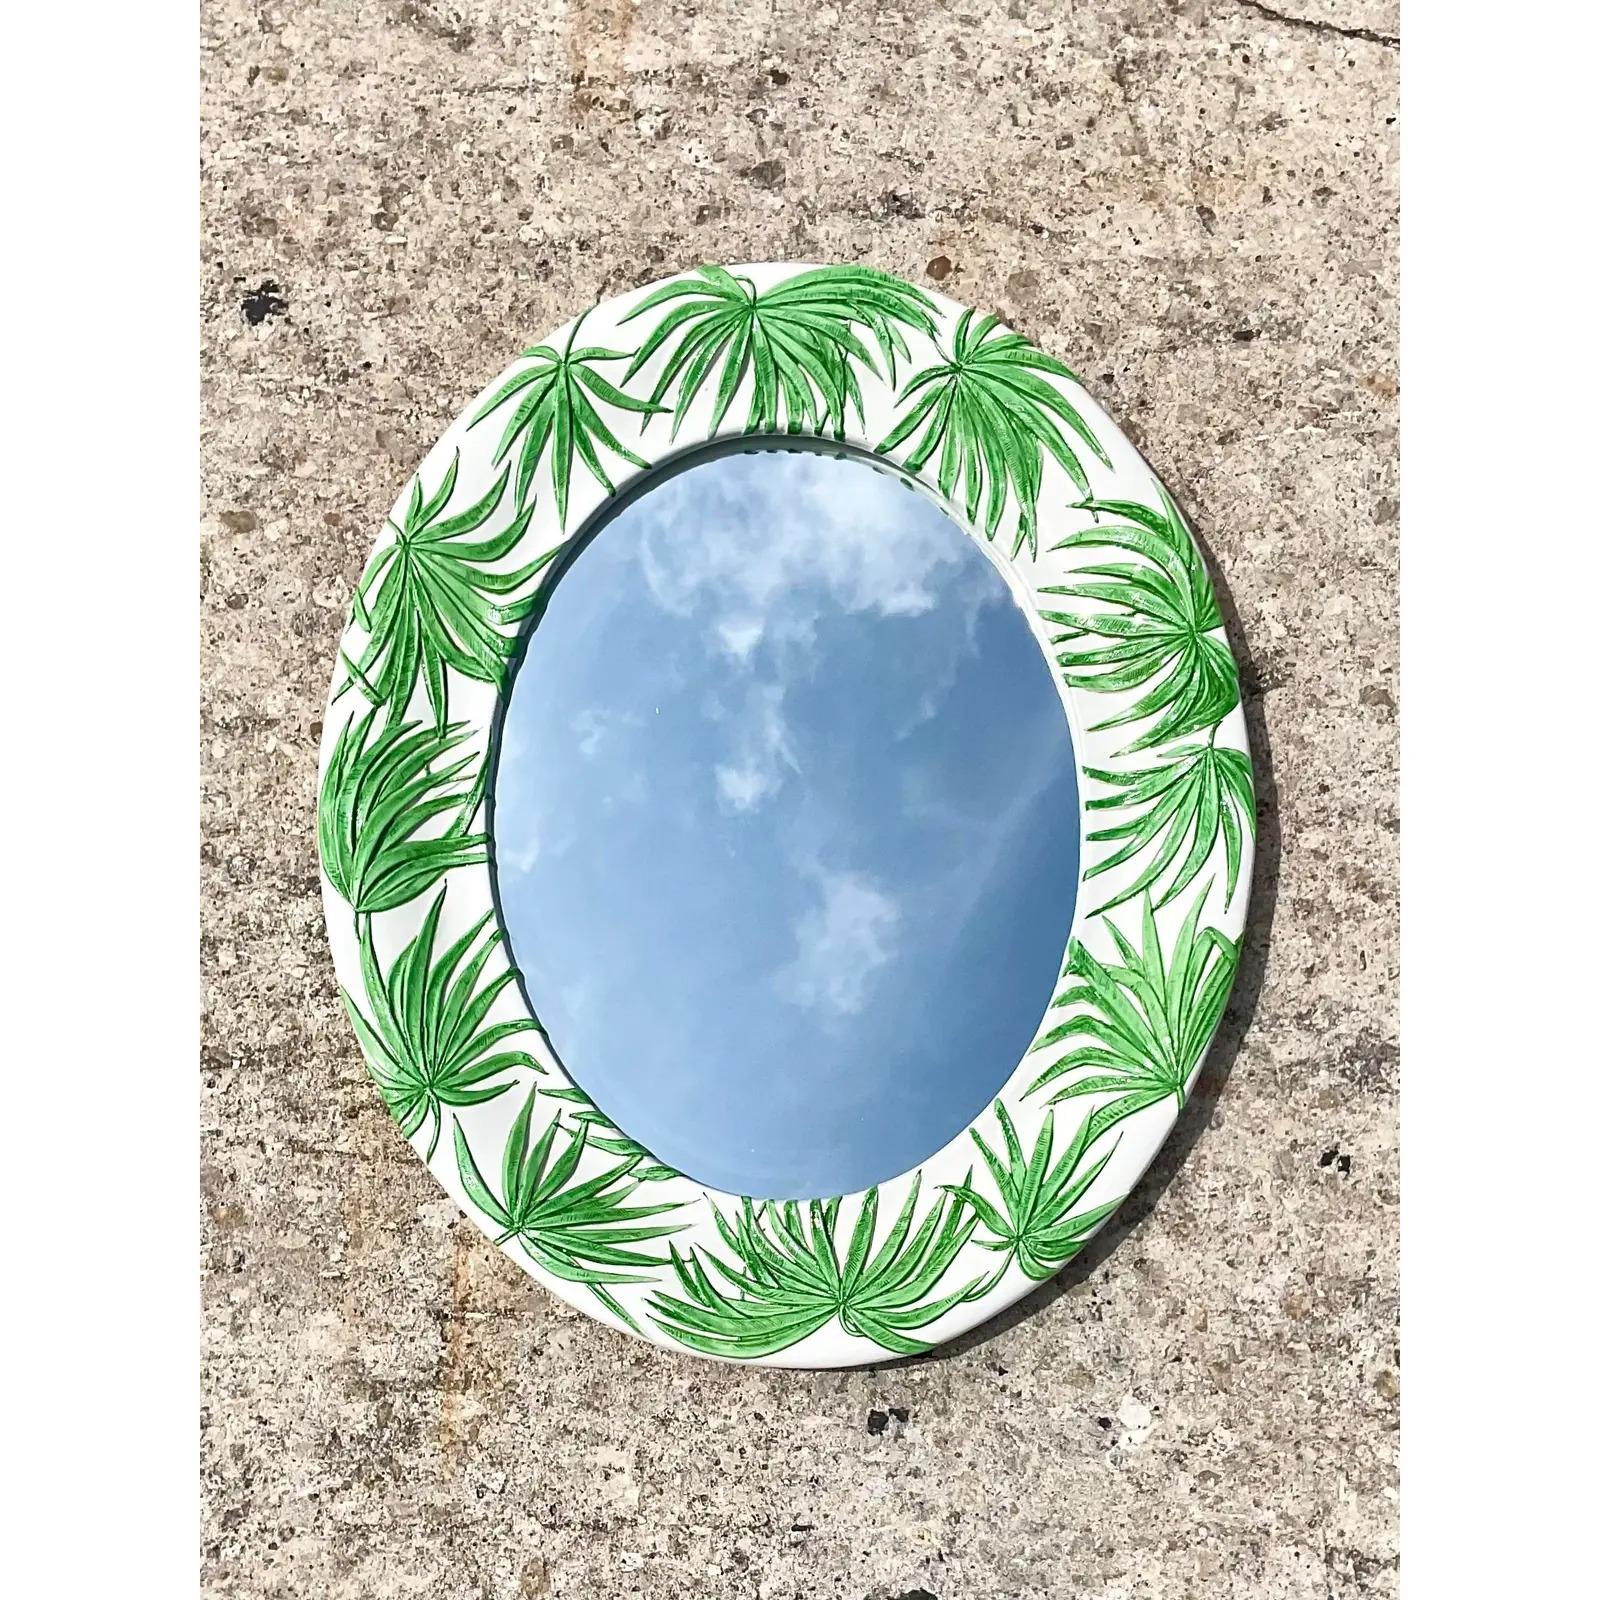 Fantastic vintage glazed ceramic mirror. Fabulous palm frond design. Acquired from a Palm Beach estate.